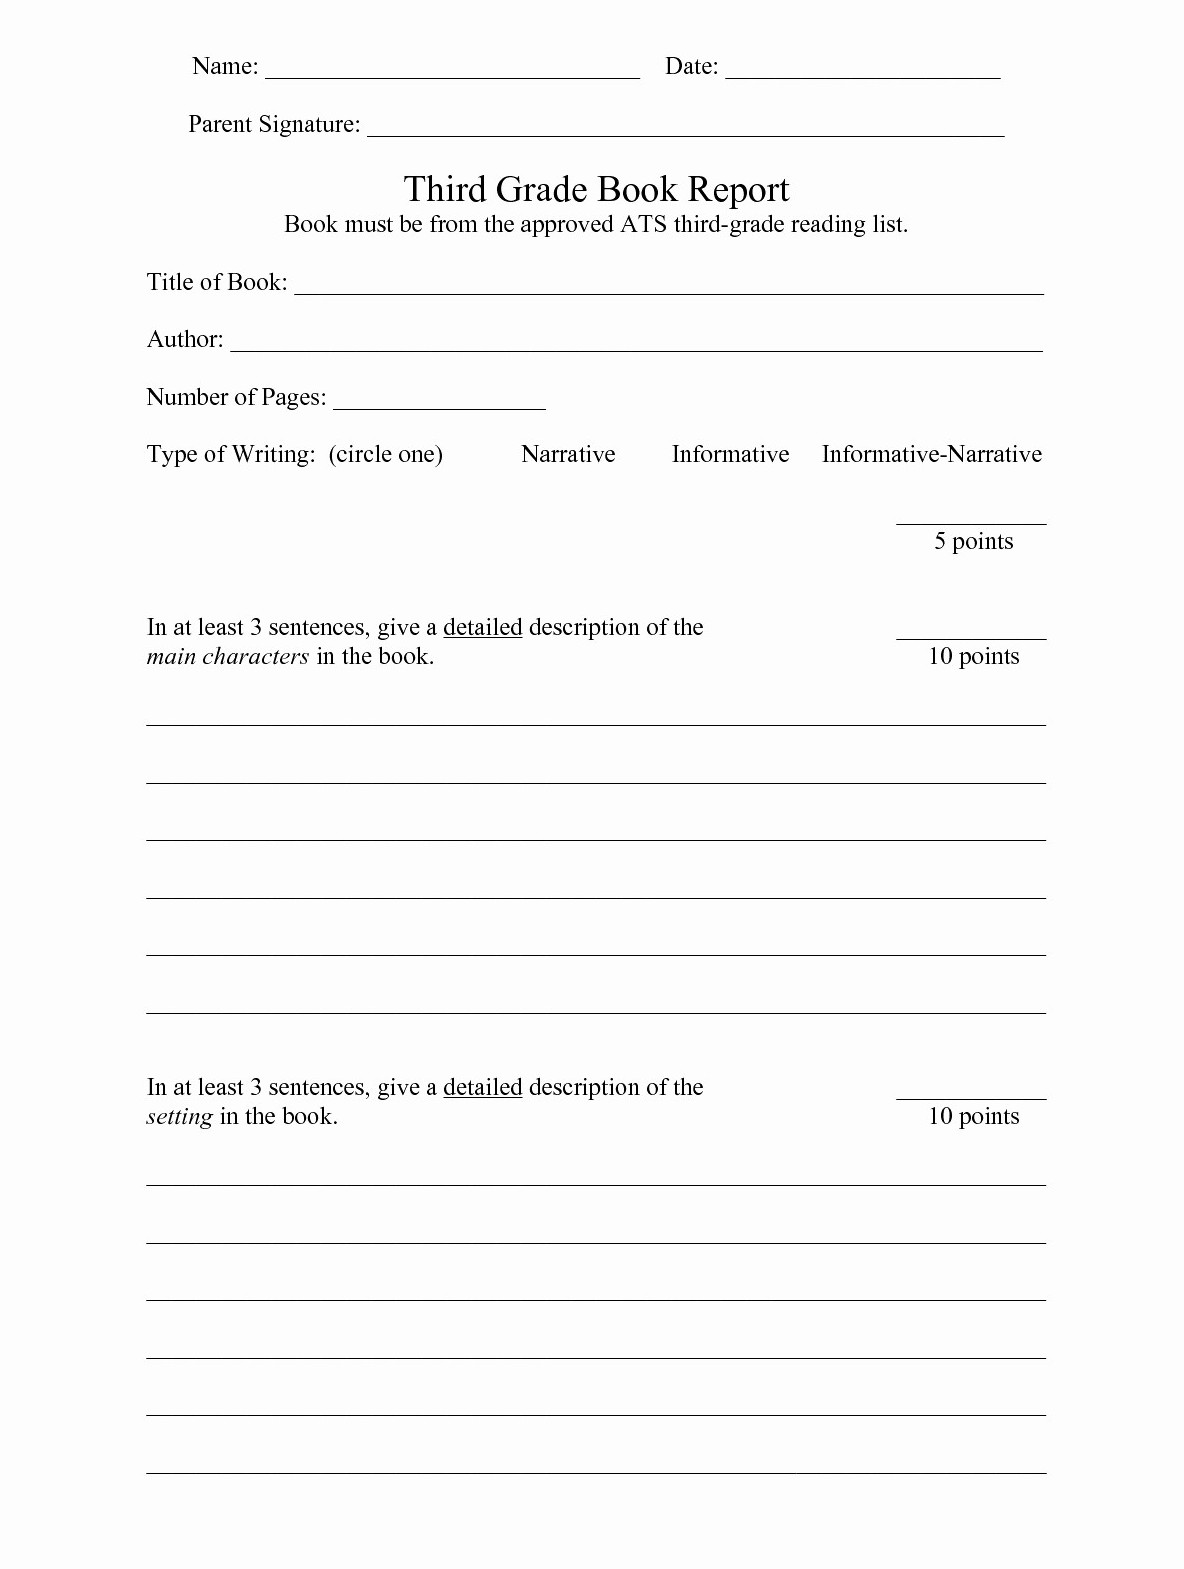 1st-to-5th-grade-book-report-template-digitally-credible-calendars